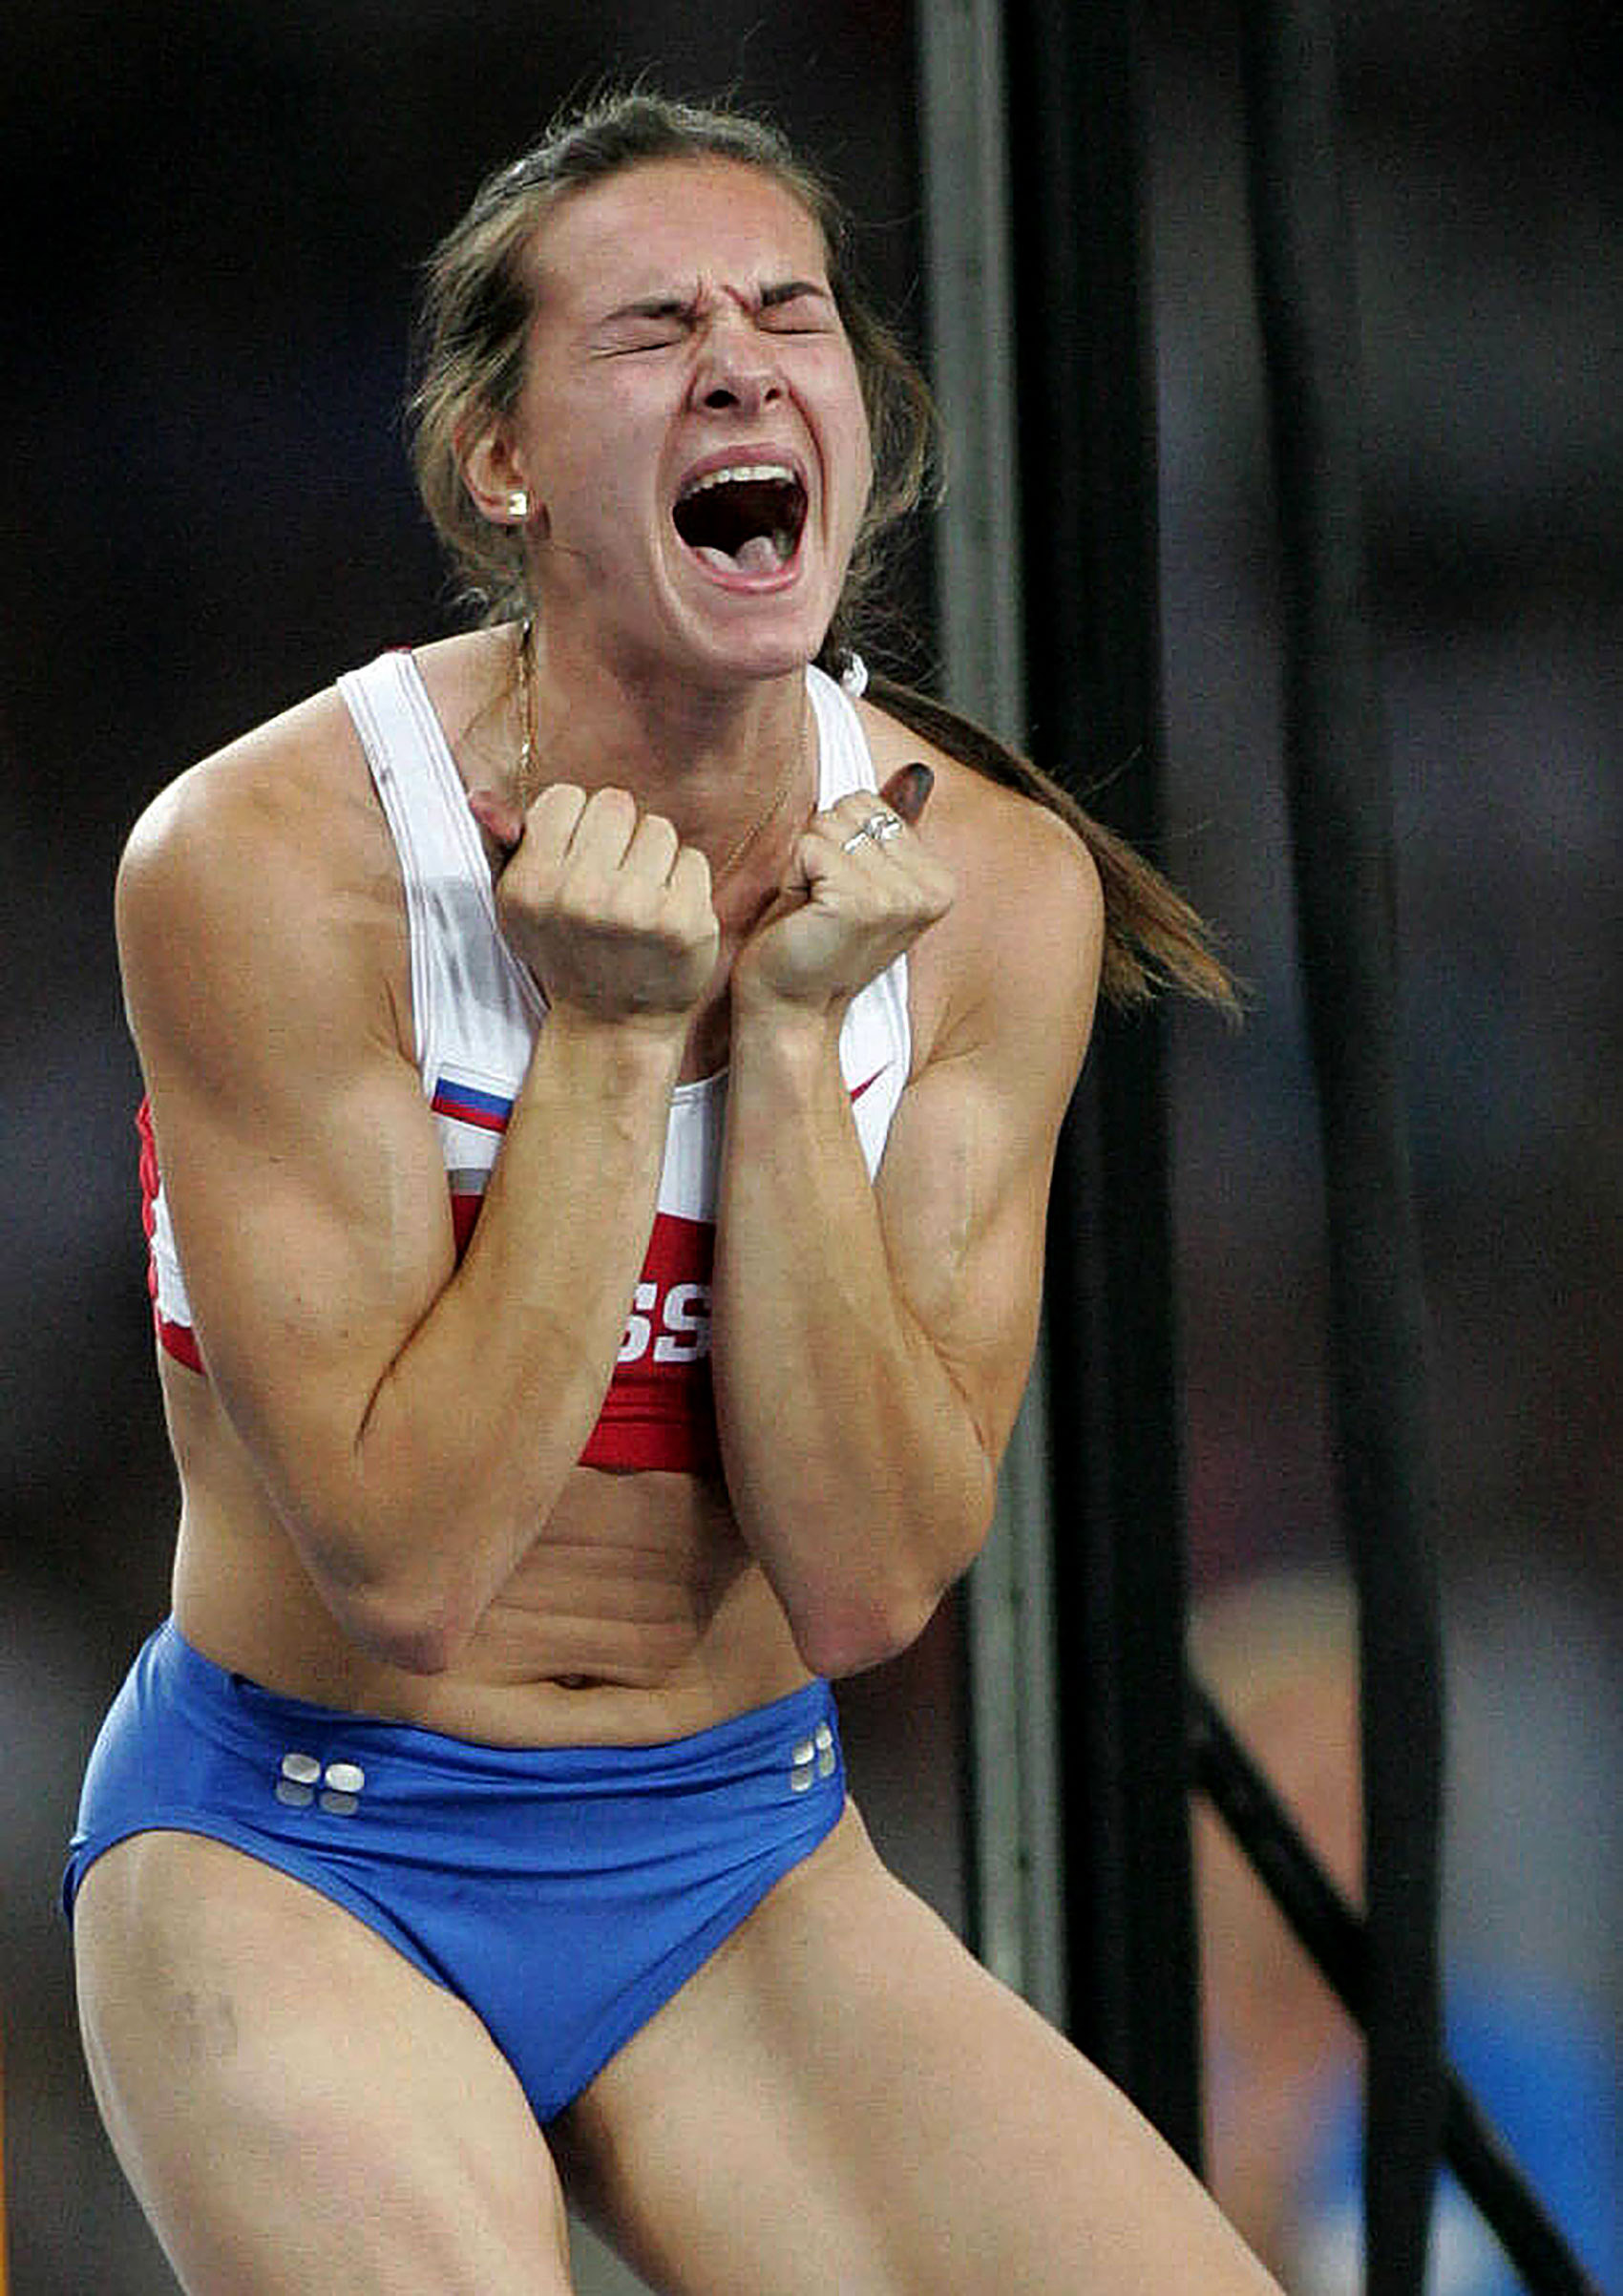   Athens Olympics 2004 Day11 - Athletics - Yelena Isinbayeva beats our own World Record in the Pole Vault clearing 4.91m to give her the Gold medal.  pic. Phil Hillyard.  